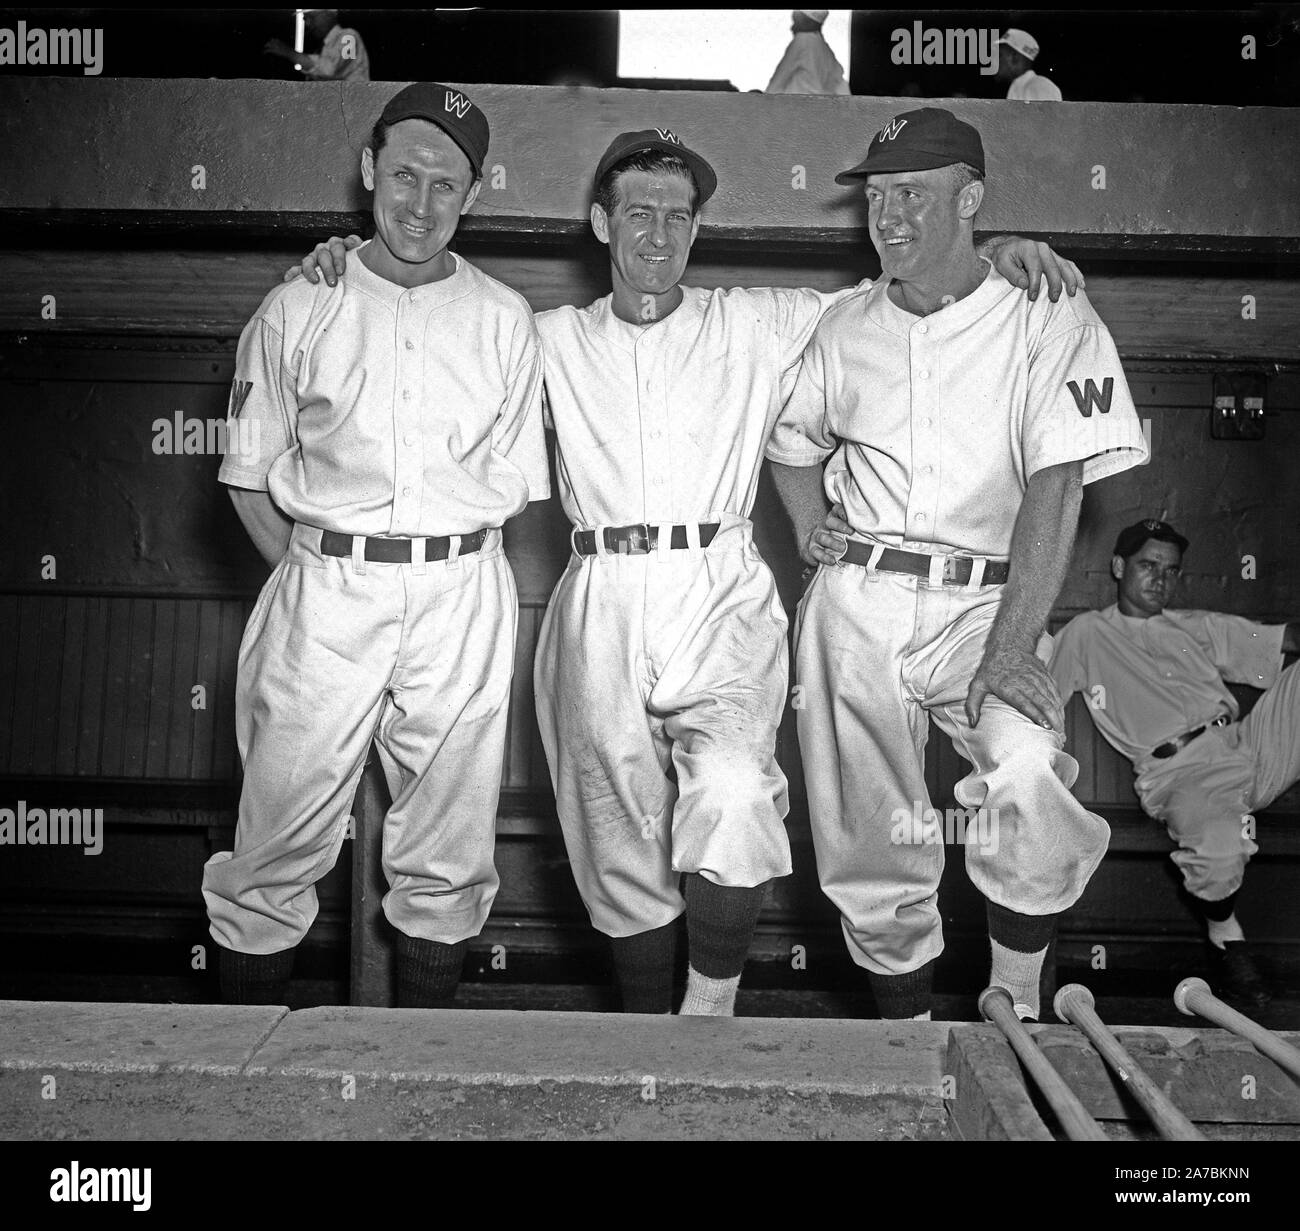 Three Washington Baseball players (or coaches) standing on dug out steps ca. 1936 Stock Photo